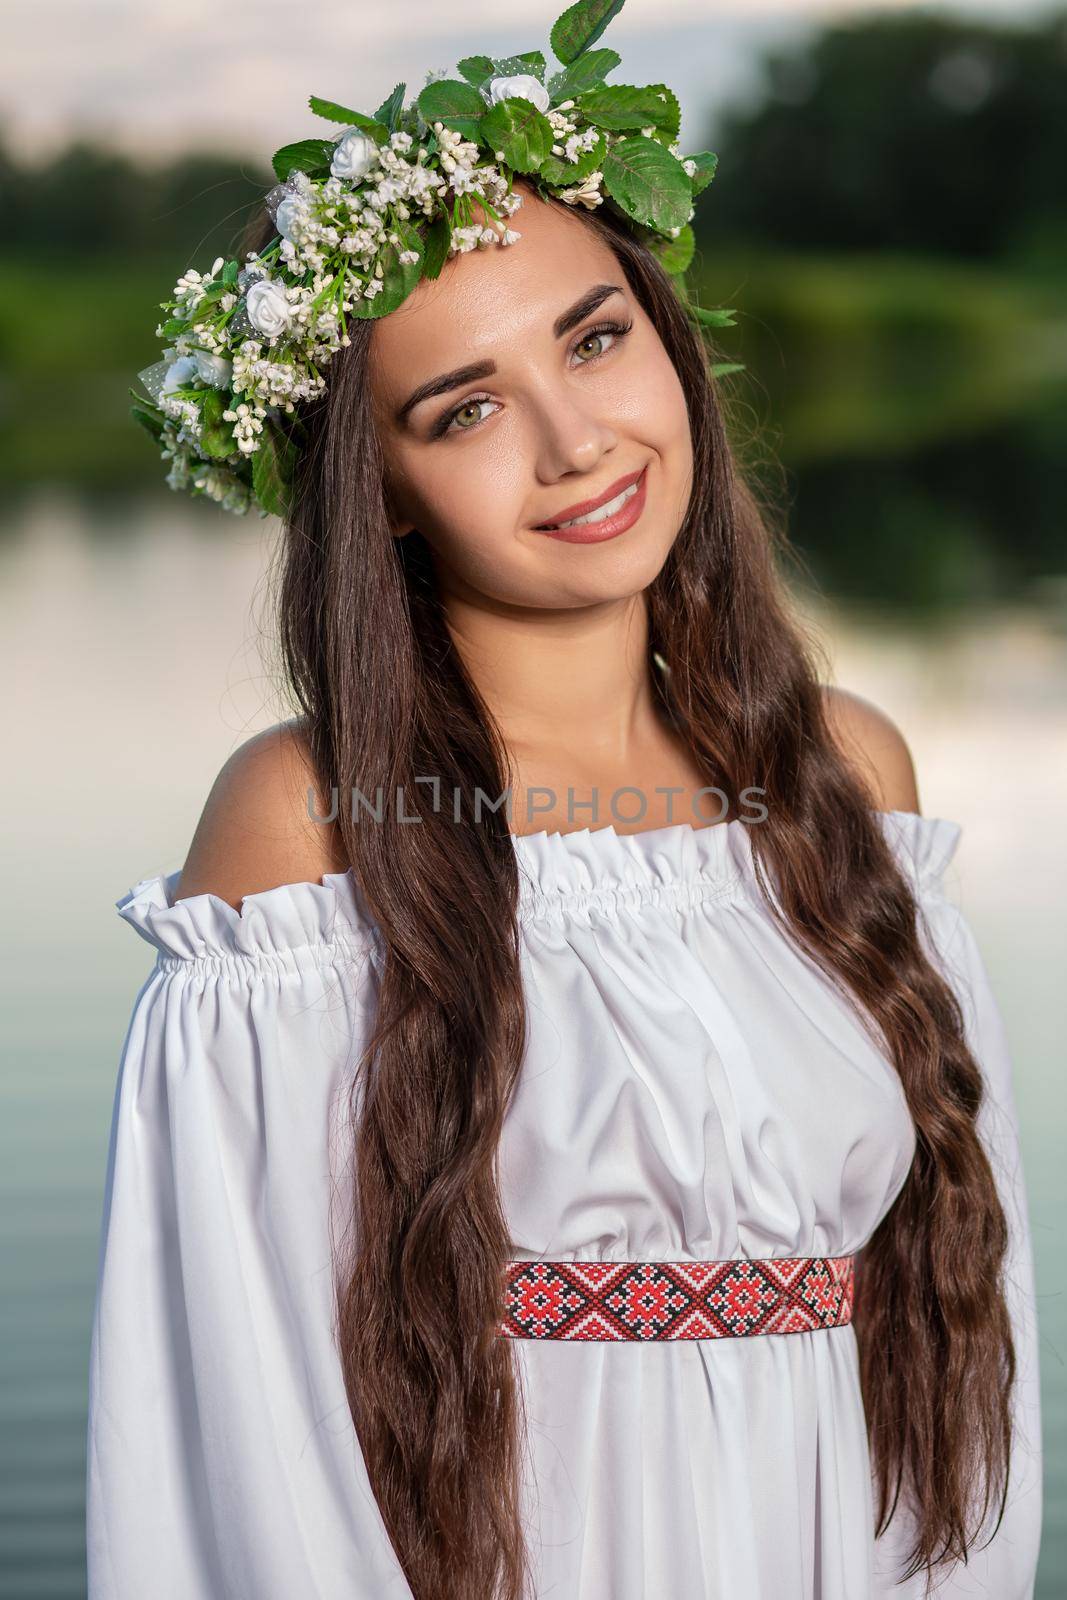 Woman in white dress in the water. Art Woman with wreath on her head in river. Wet witch Girl in the lake, mystical mysterious woman. Wreath on her head, Slavic traditions and paganism